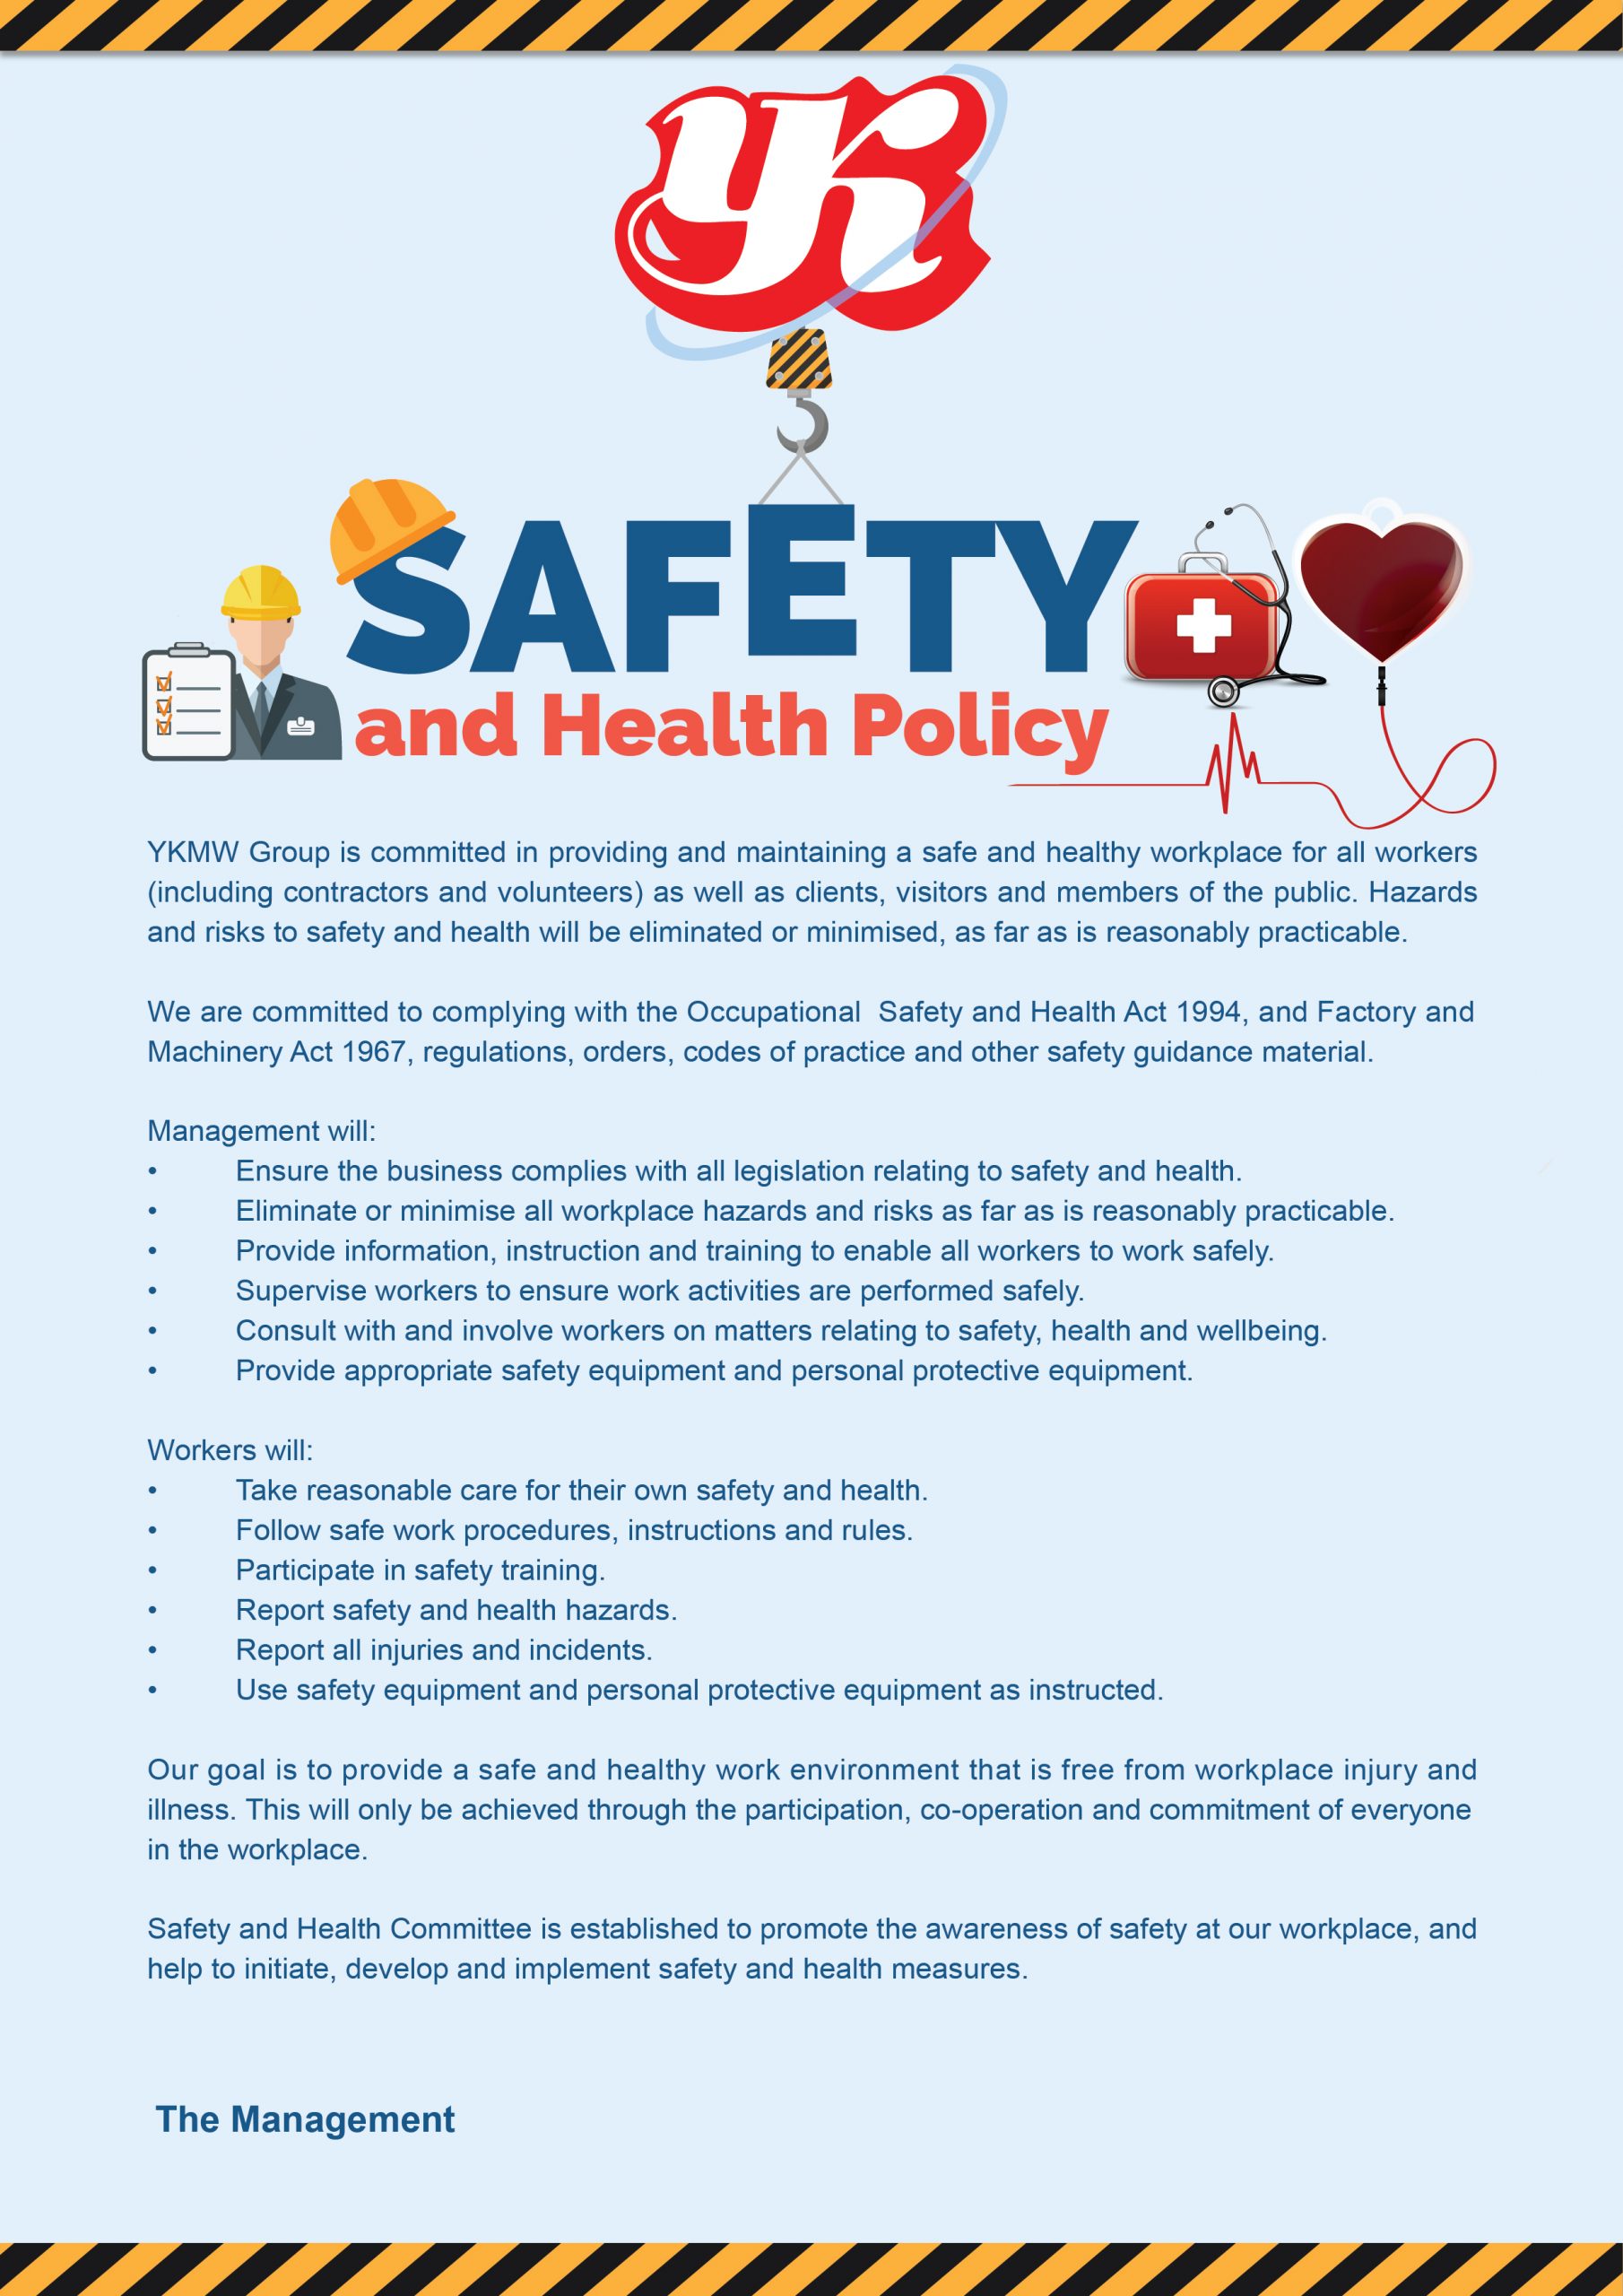 safety and health policy poster